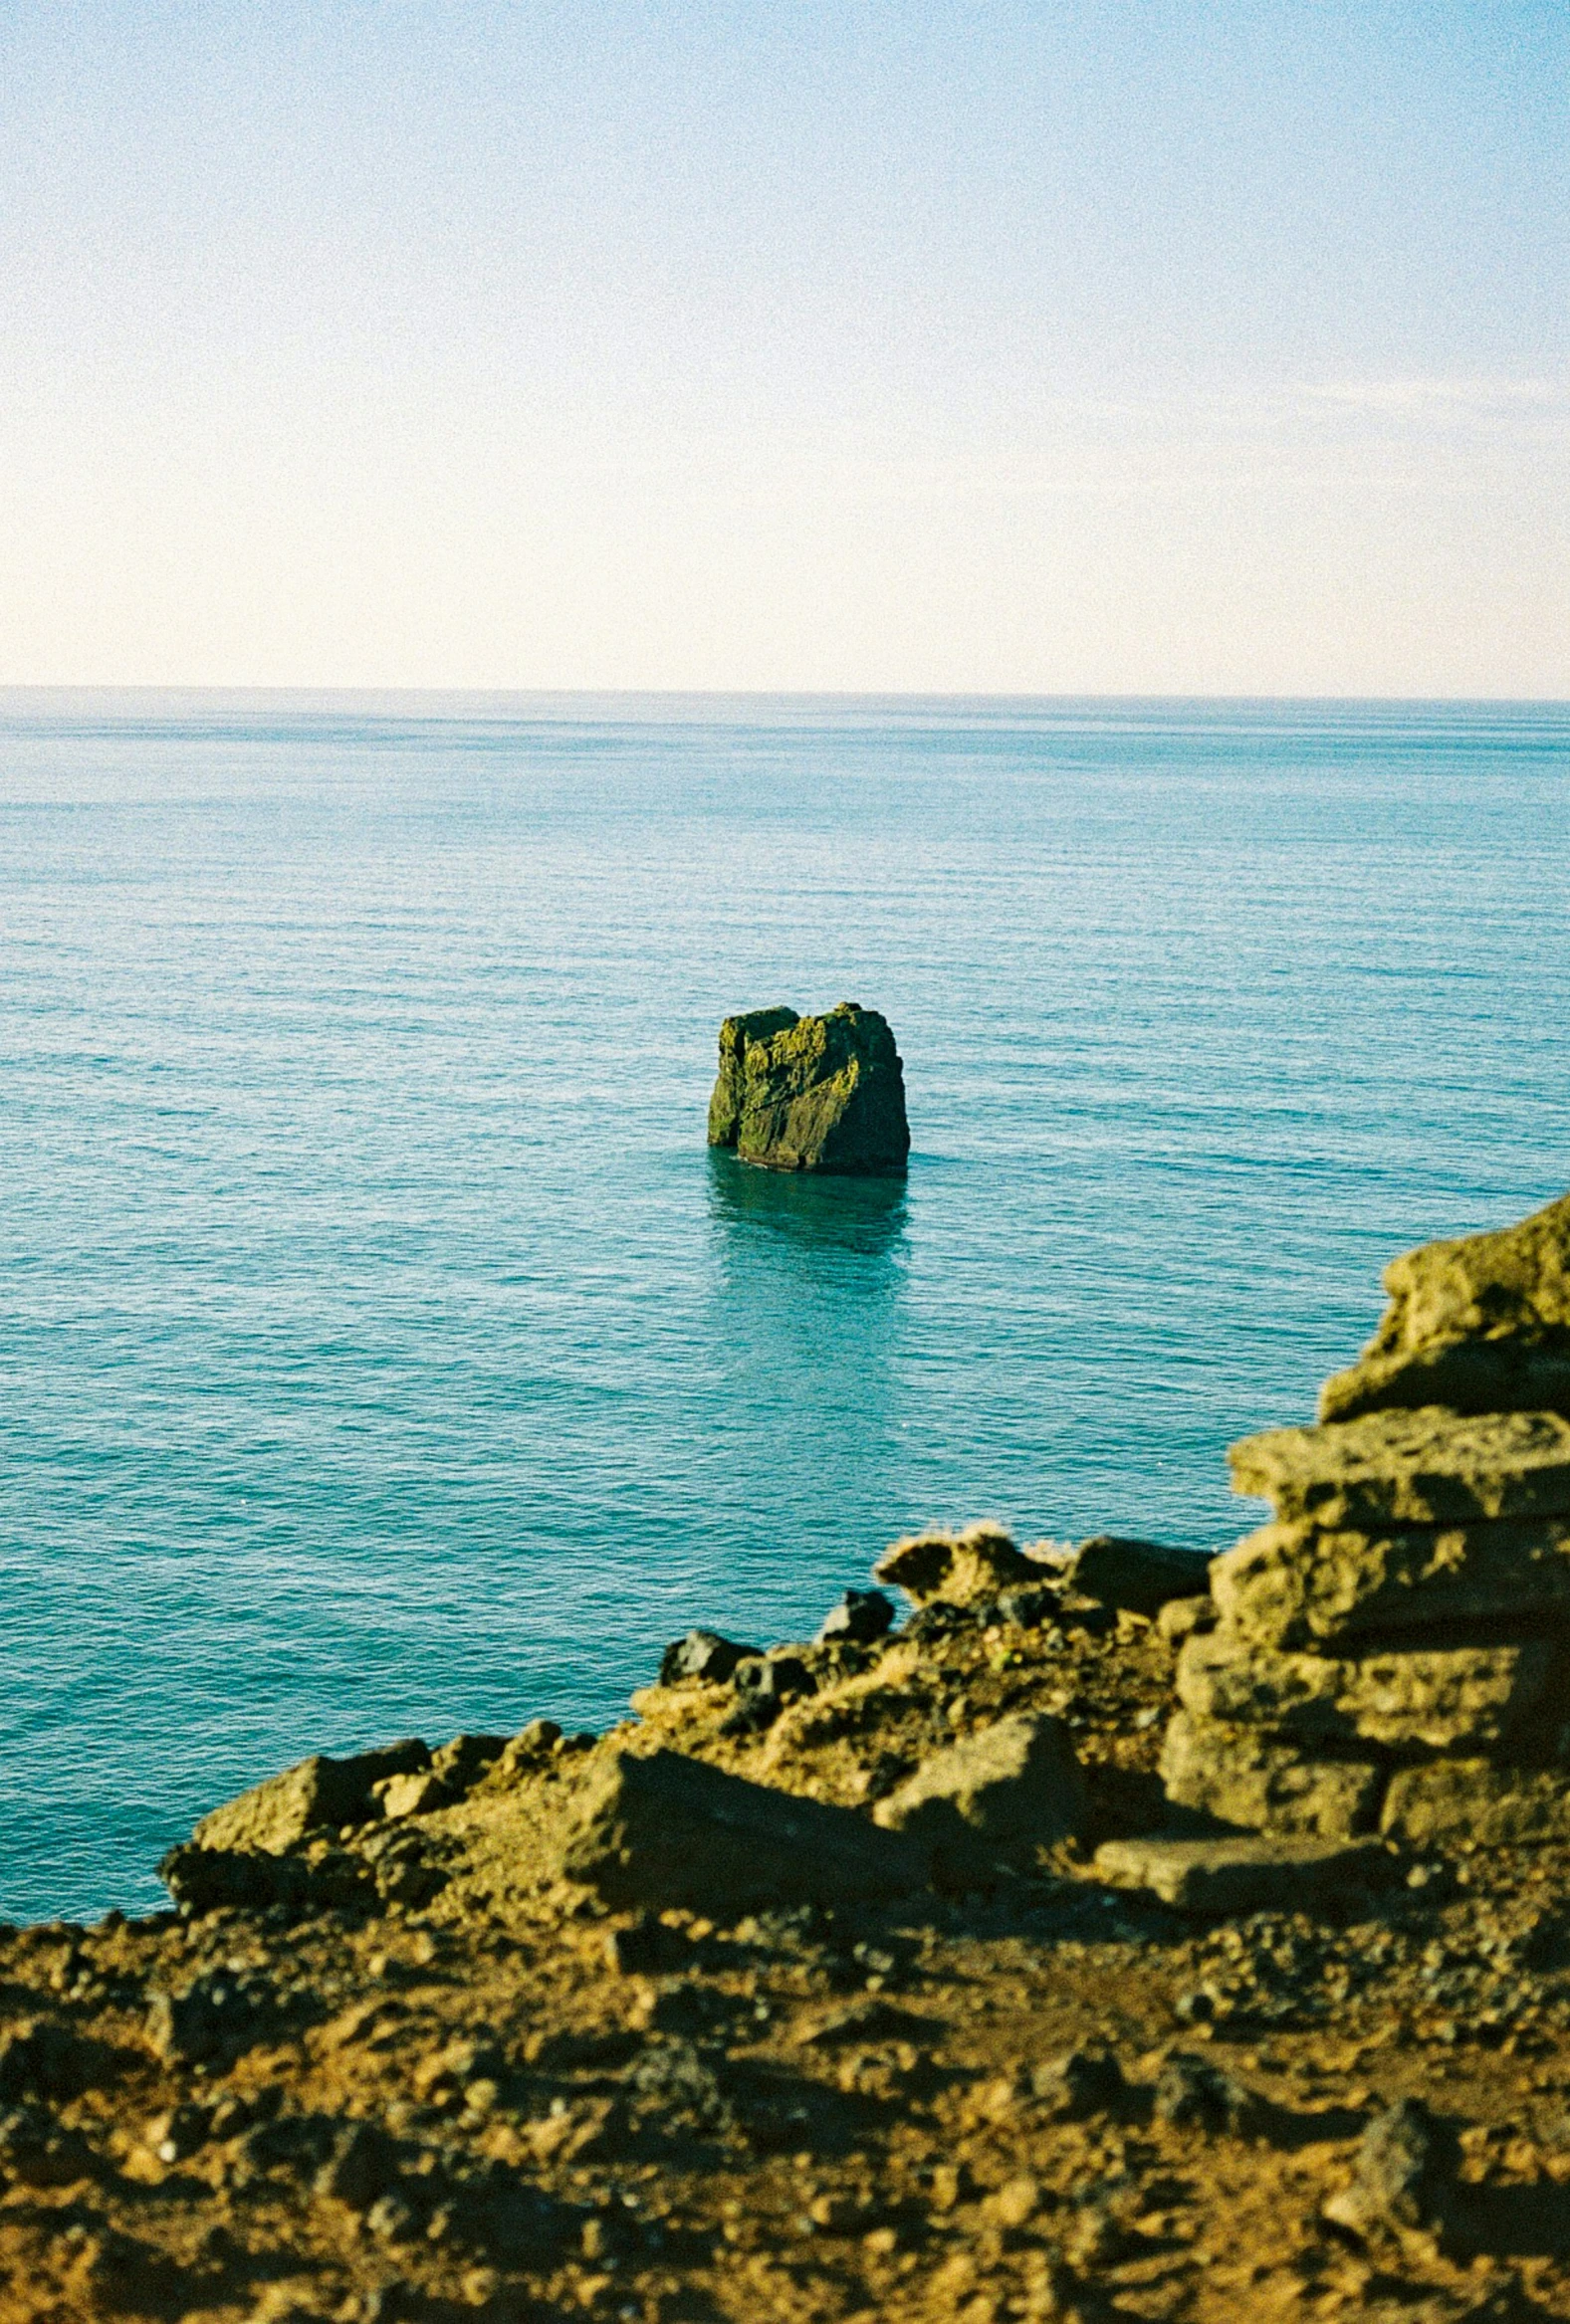 an ocean with a large rock formation and people standing near the shore